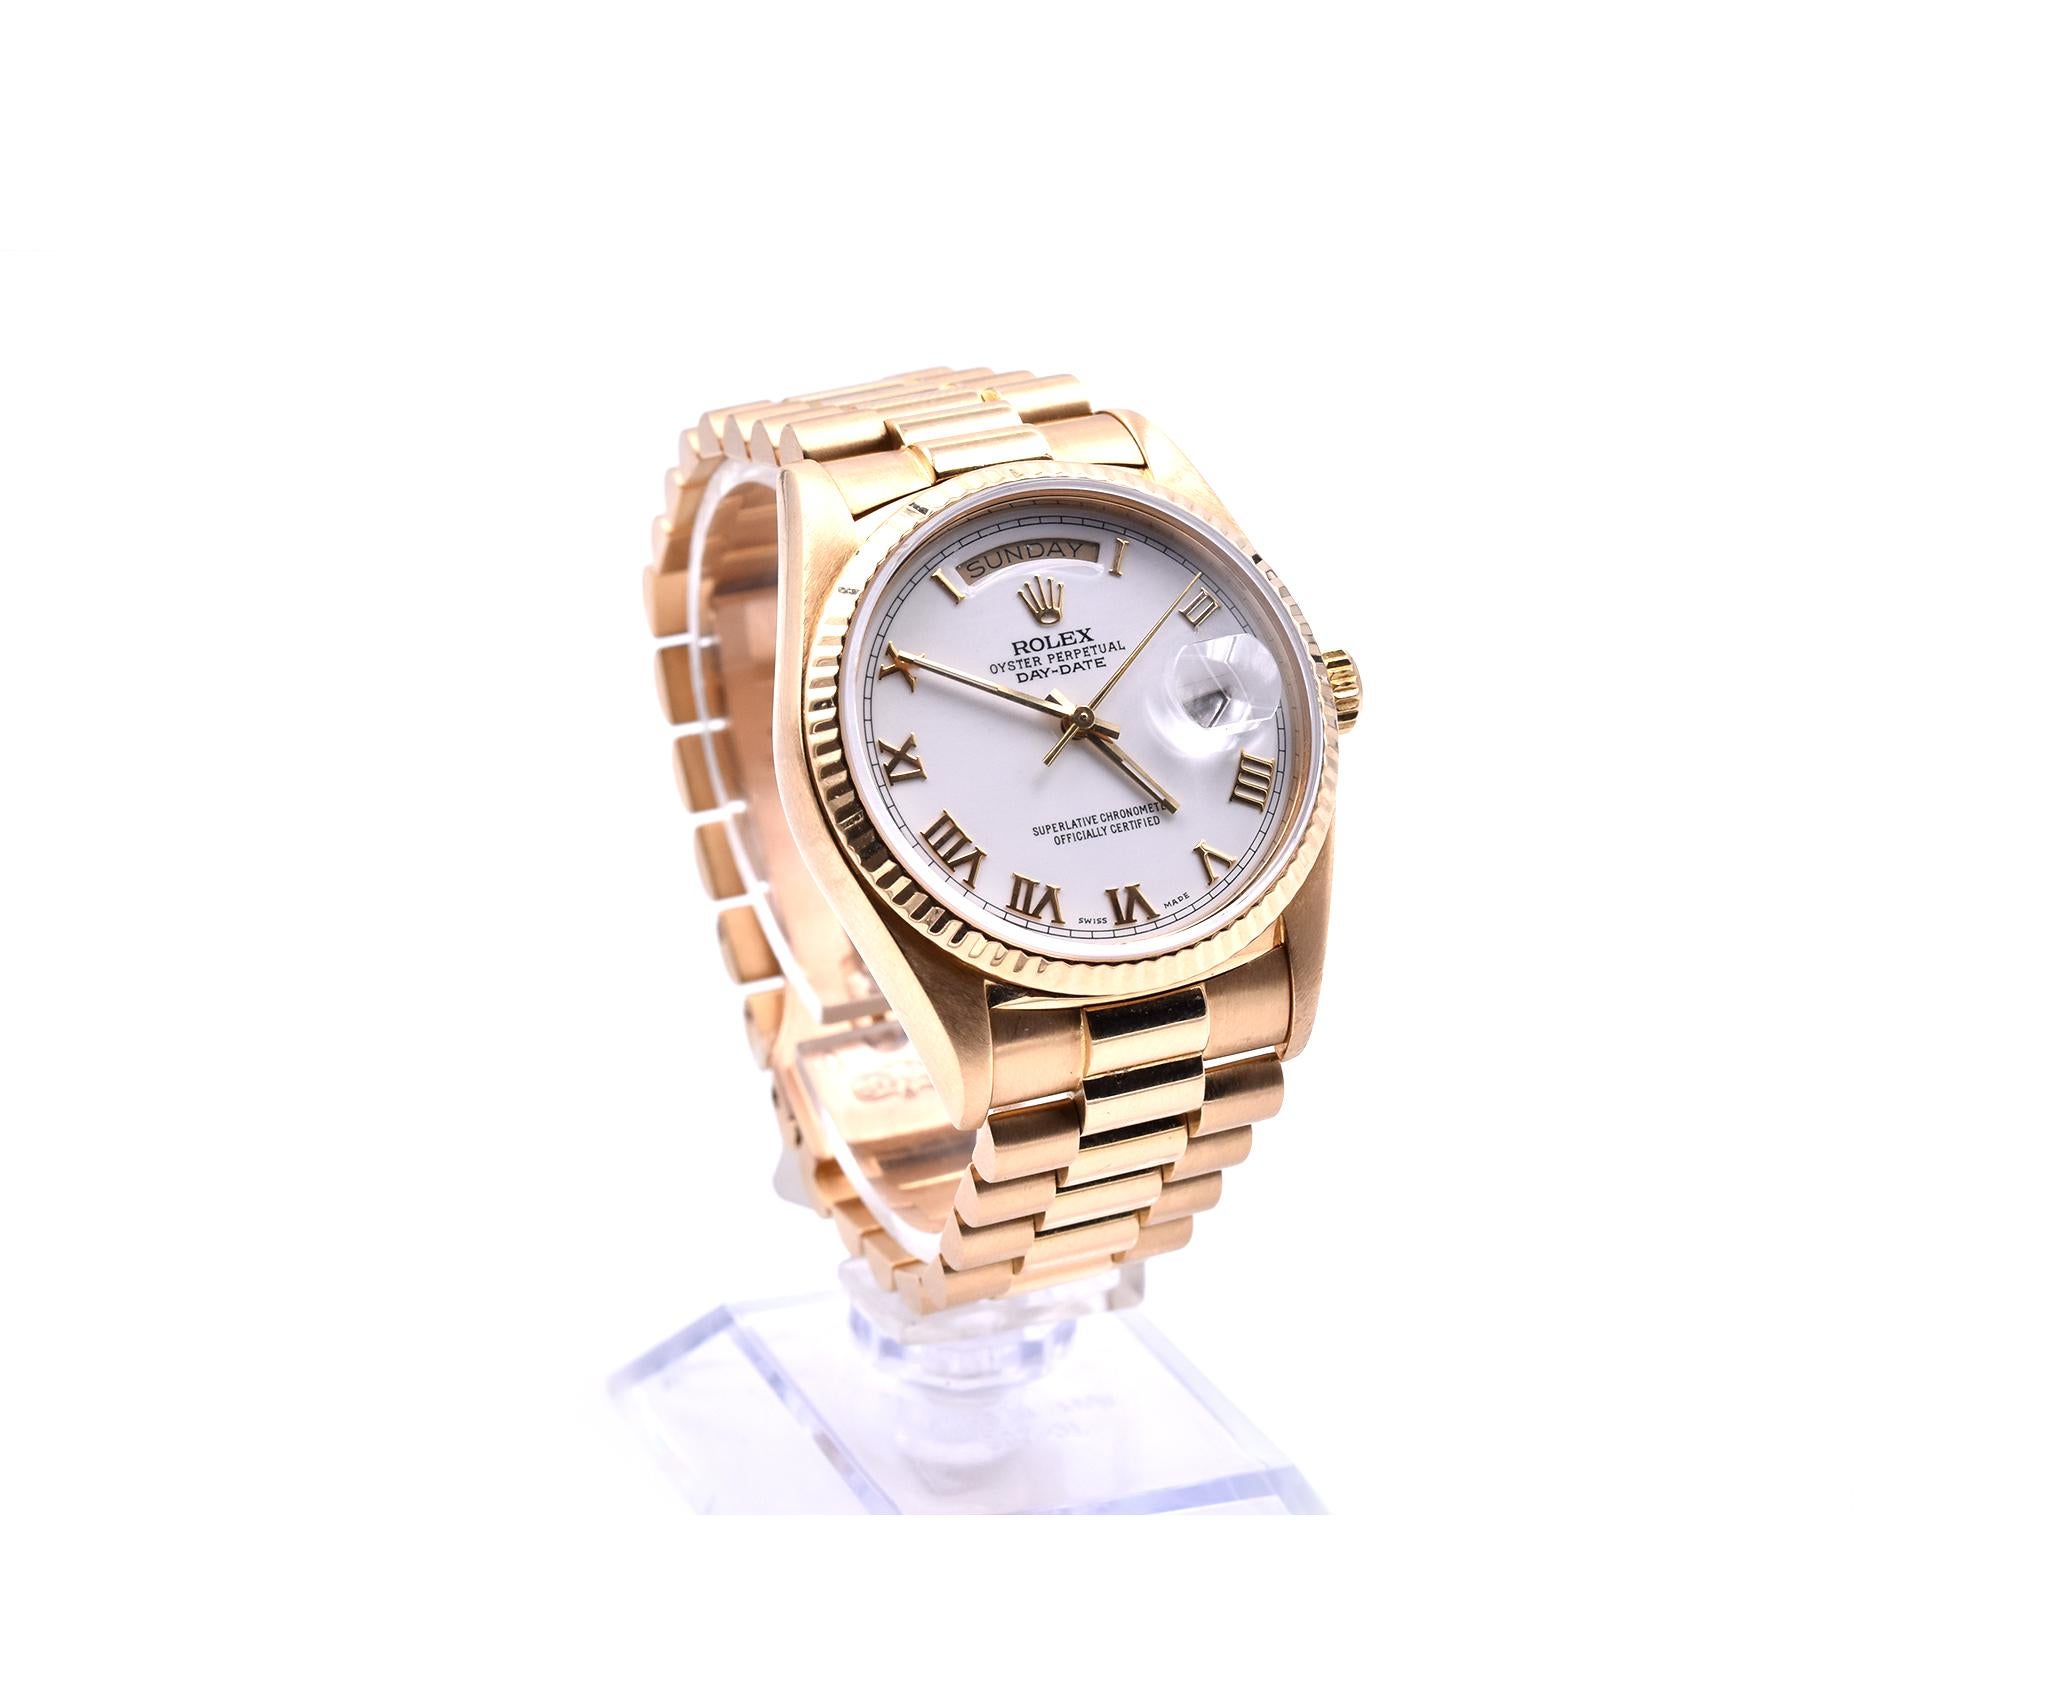 
Movement: automatic
Function: seconds, minutes, hours, day, single quick
Case: 36mm 18k yellow gold case, scratch resistant sapphire crystal
Band: 18k yellow gold presidential bracelet with concealed Crownclasp
Dial: White dial with yellow gold